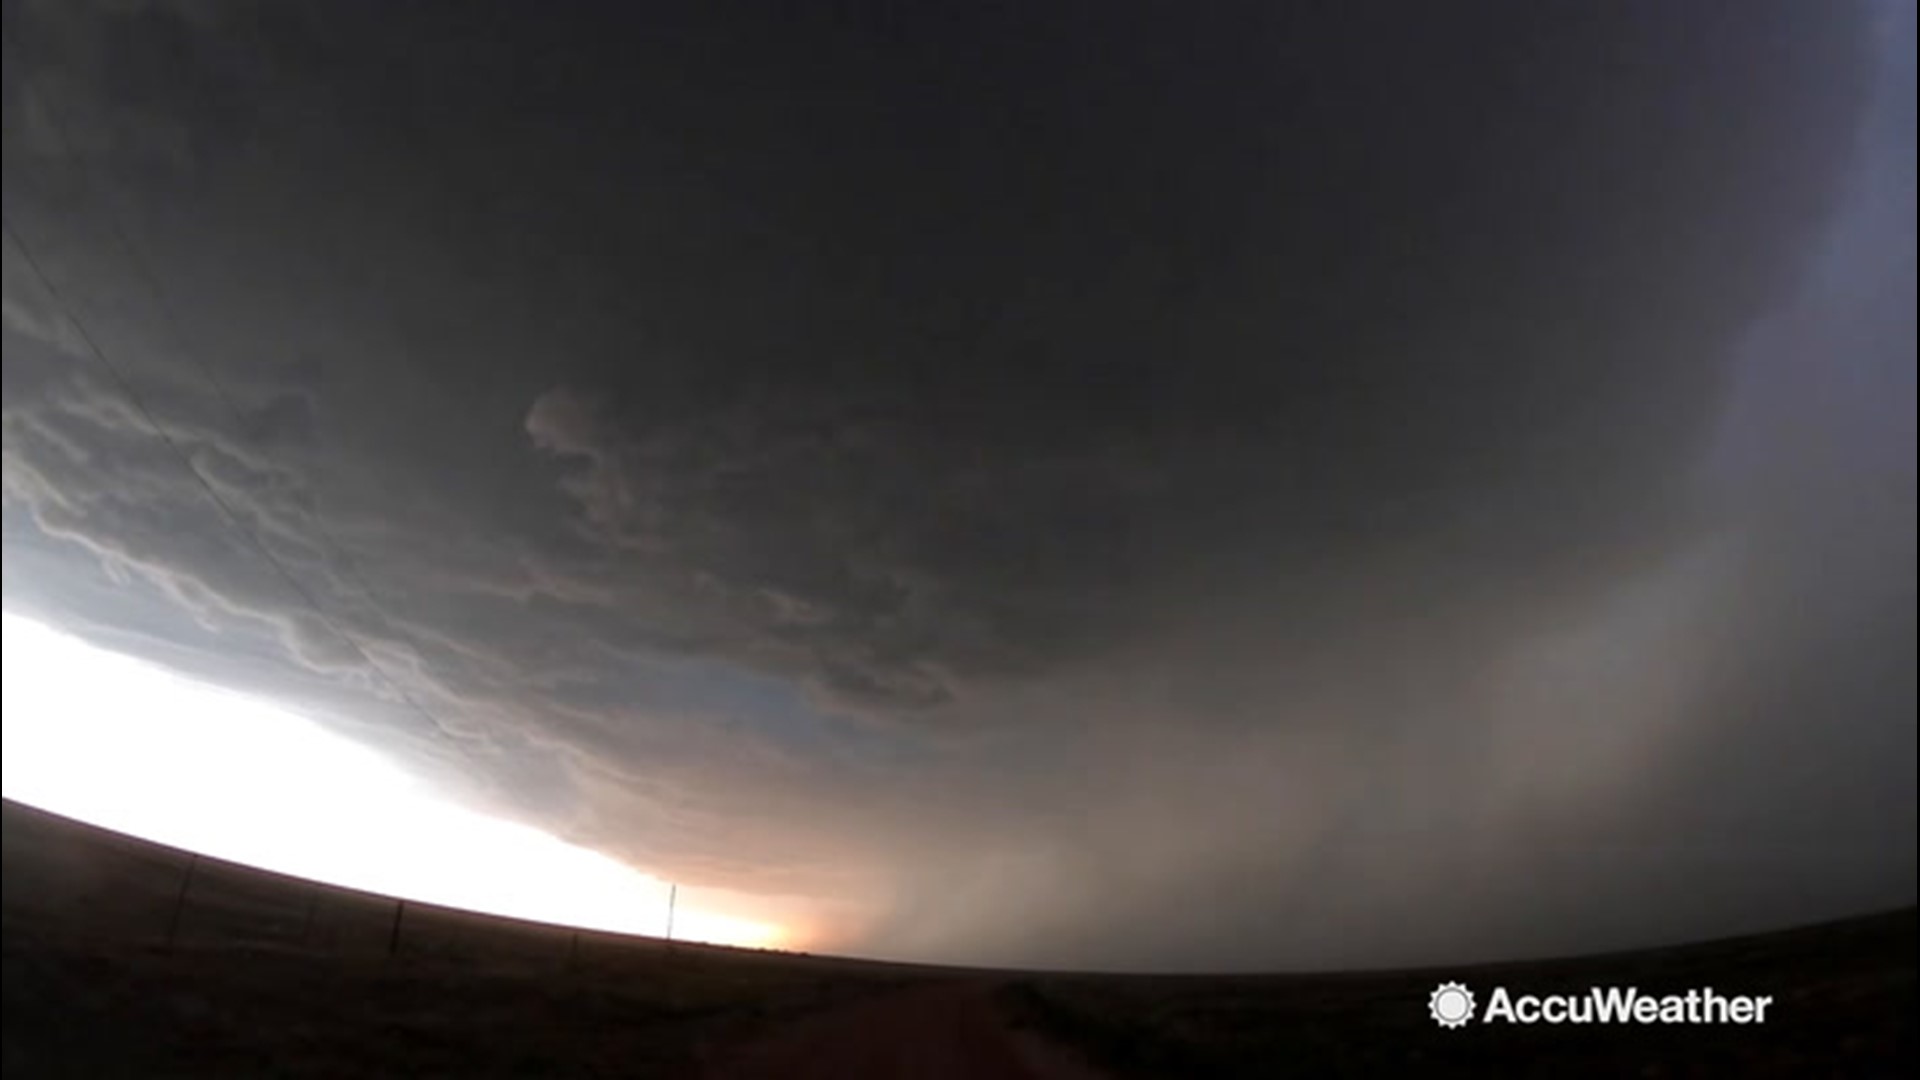 Storm chaser Reed Timmer was in Amistead, New Mexico where he caught this ominous dark supercell forming overhead on June 13.